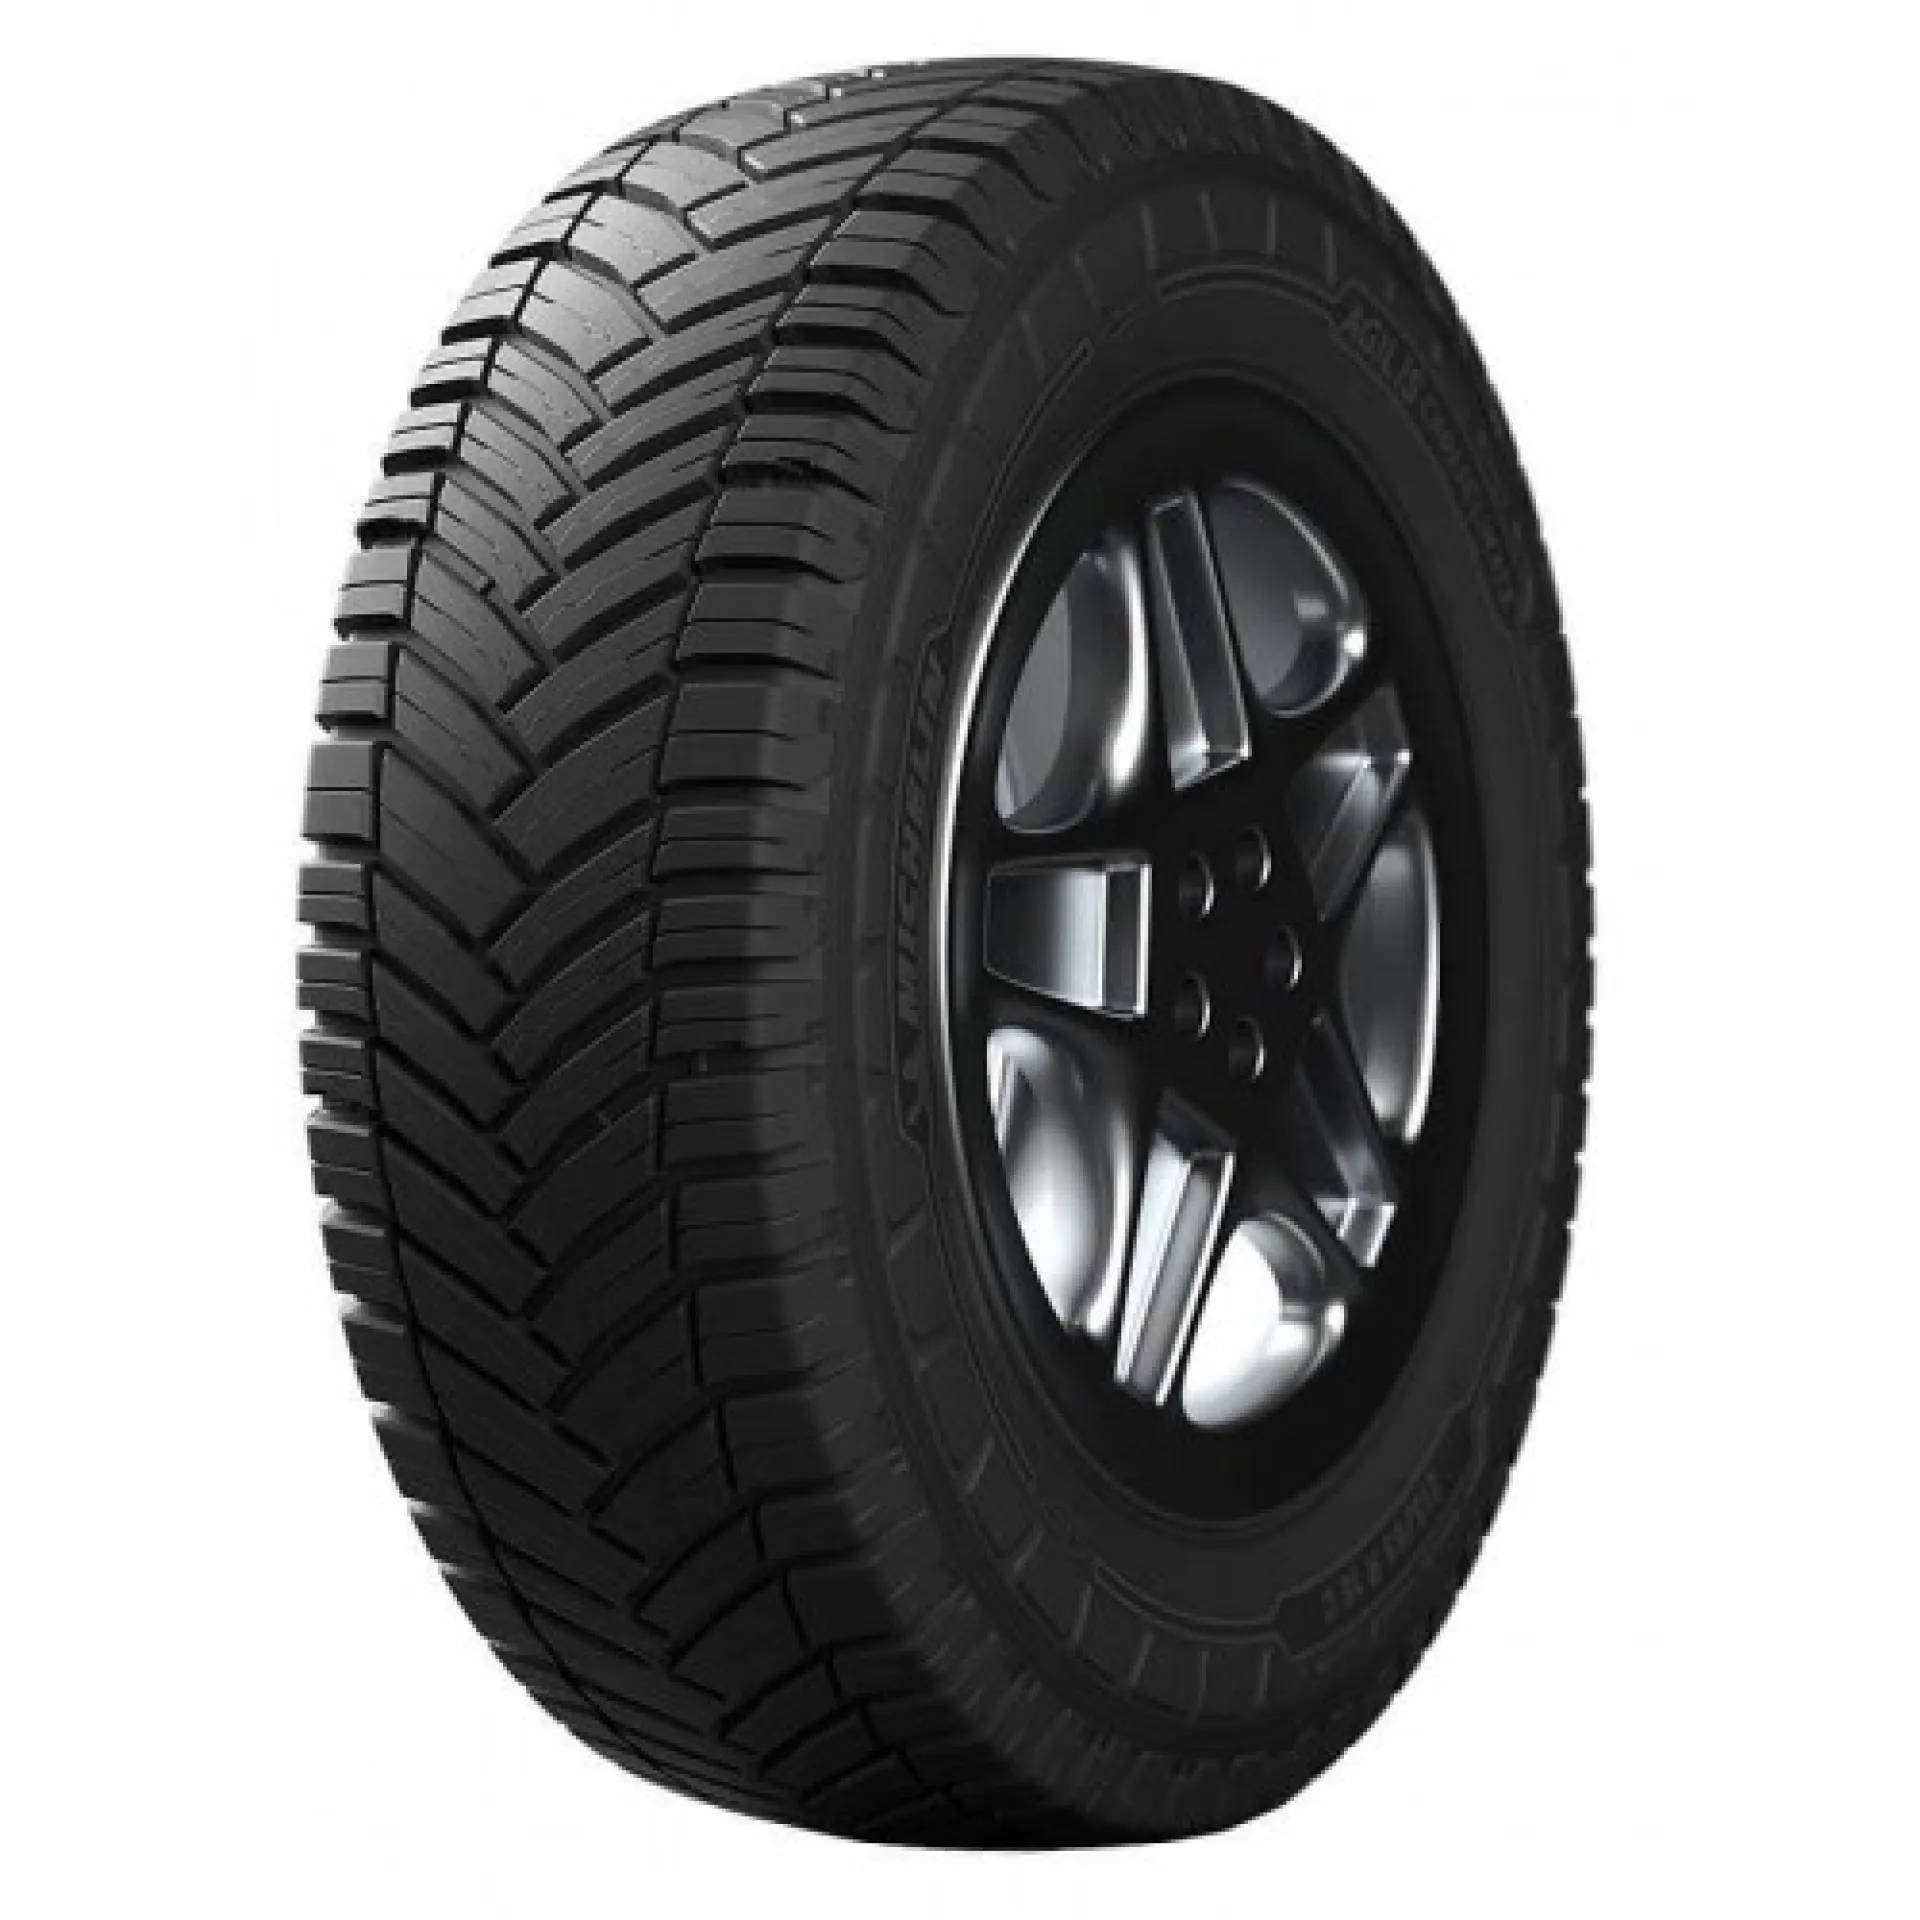 Michelin Agilis CrossClimate - Tyre Reviews and Tests